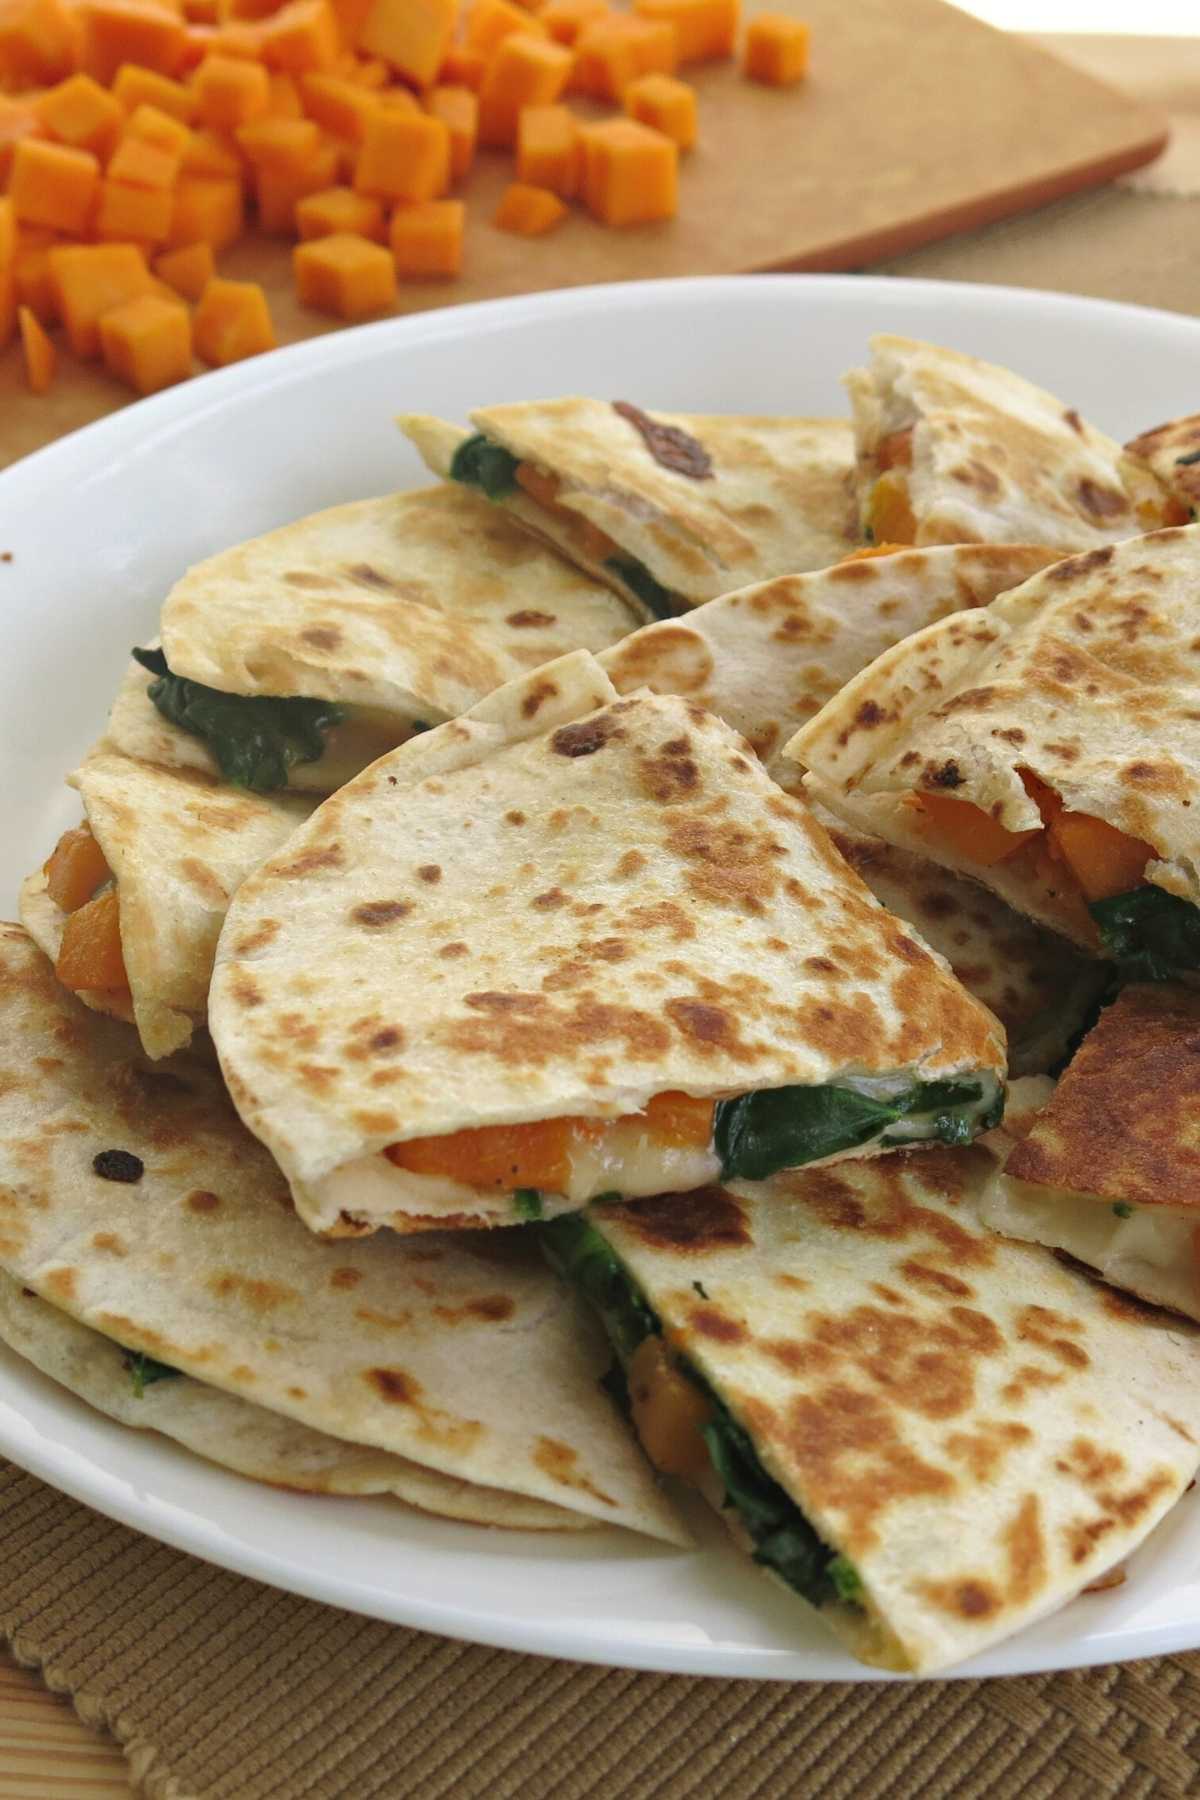 A plate of quesadillas made with butternut squash, spinach, and cheese.